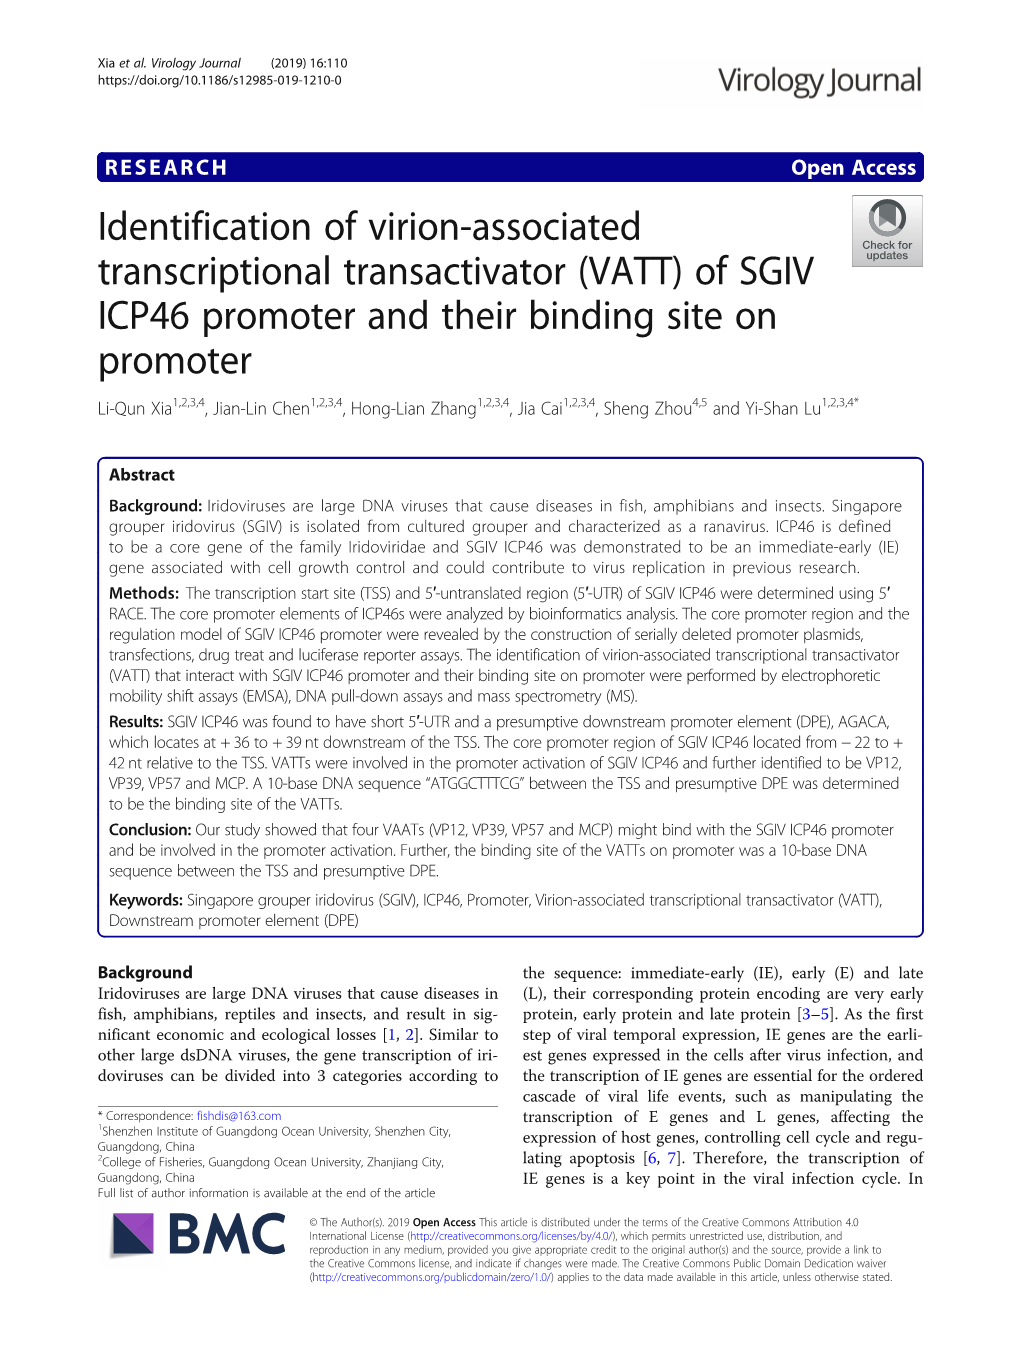 (VATT) of SGIV ICP46 Promoter and Their Binding Site on Promo